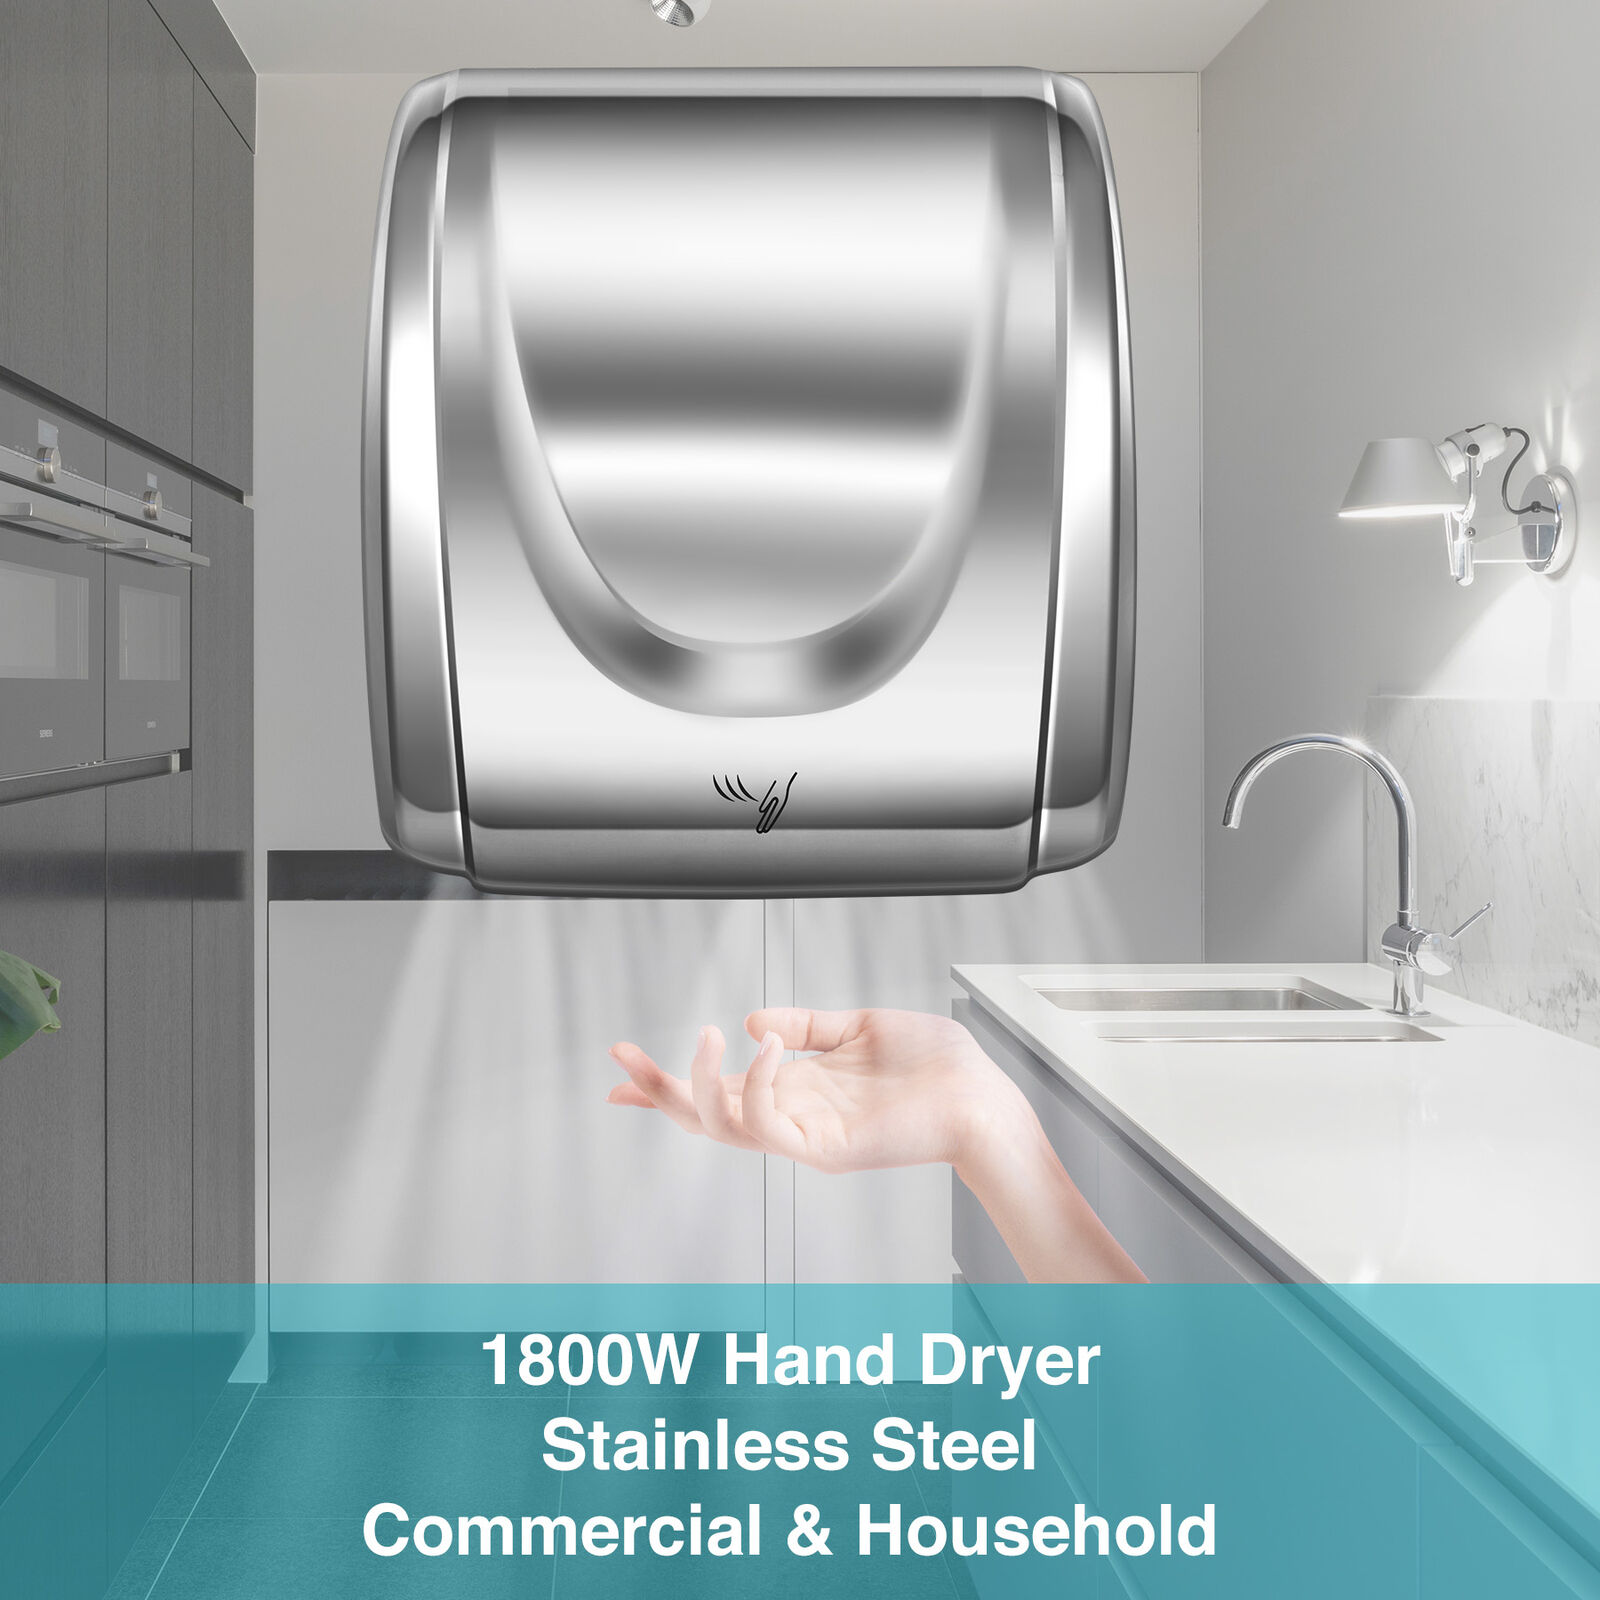 1800W Commercial and Household Electronic Auto Hand Dryer High Speed